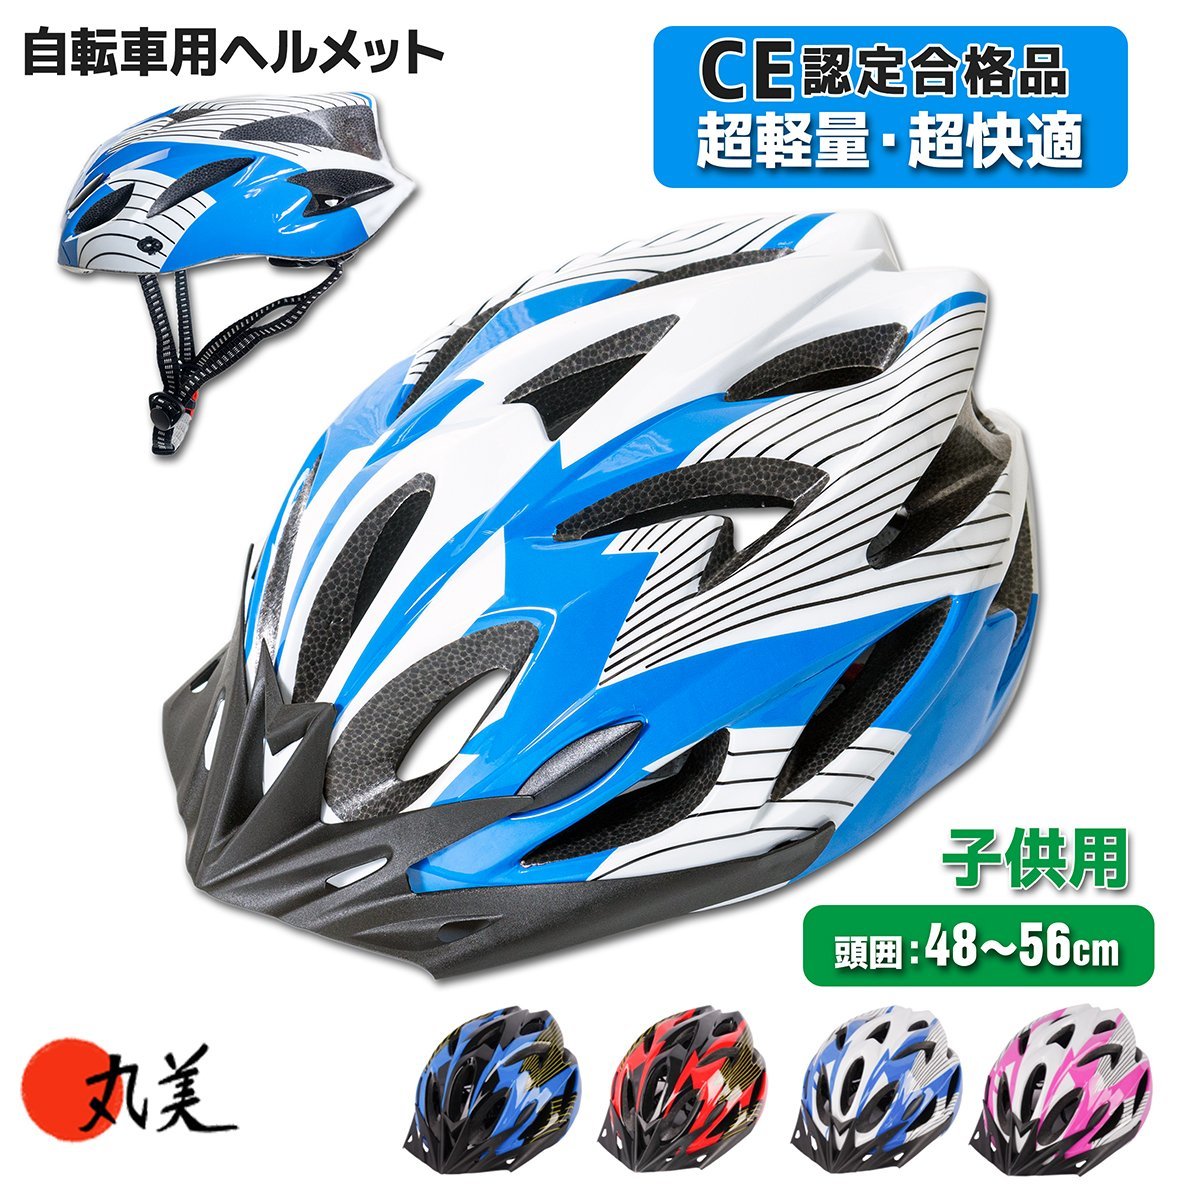 * free shipping CE standard certification stylish . simple . design super light weight street riding oriented helmet for bicycle man woman child from adult till corresponding!4 сolor selection 